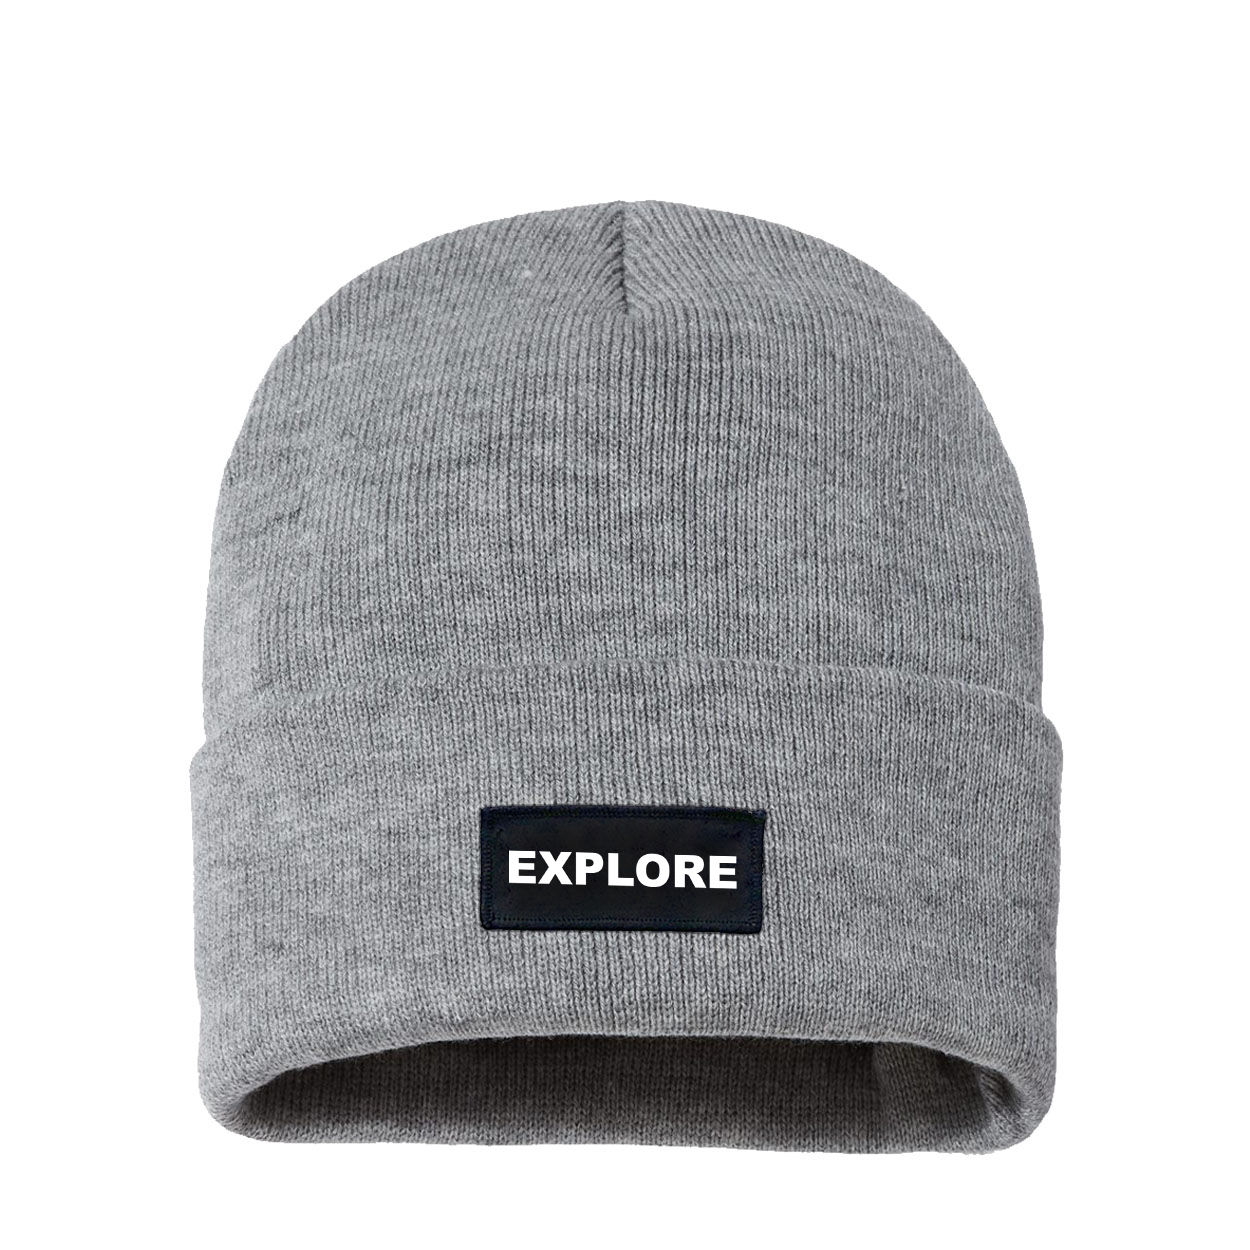 Explore Brand Logo Night Out Woven Patch Sherpa Lined Cuffed Beanie Heather Gray